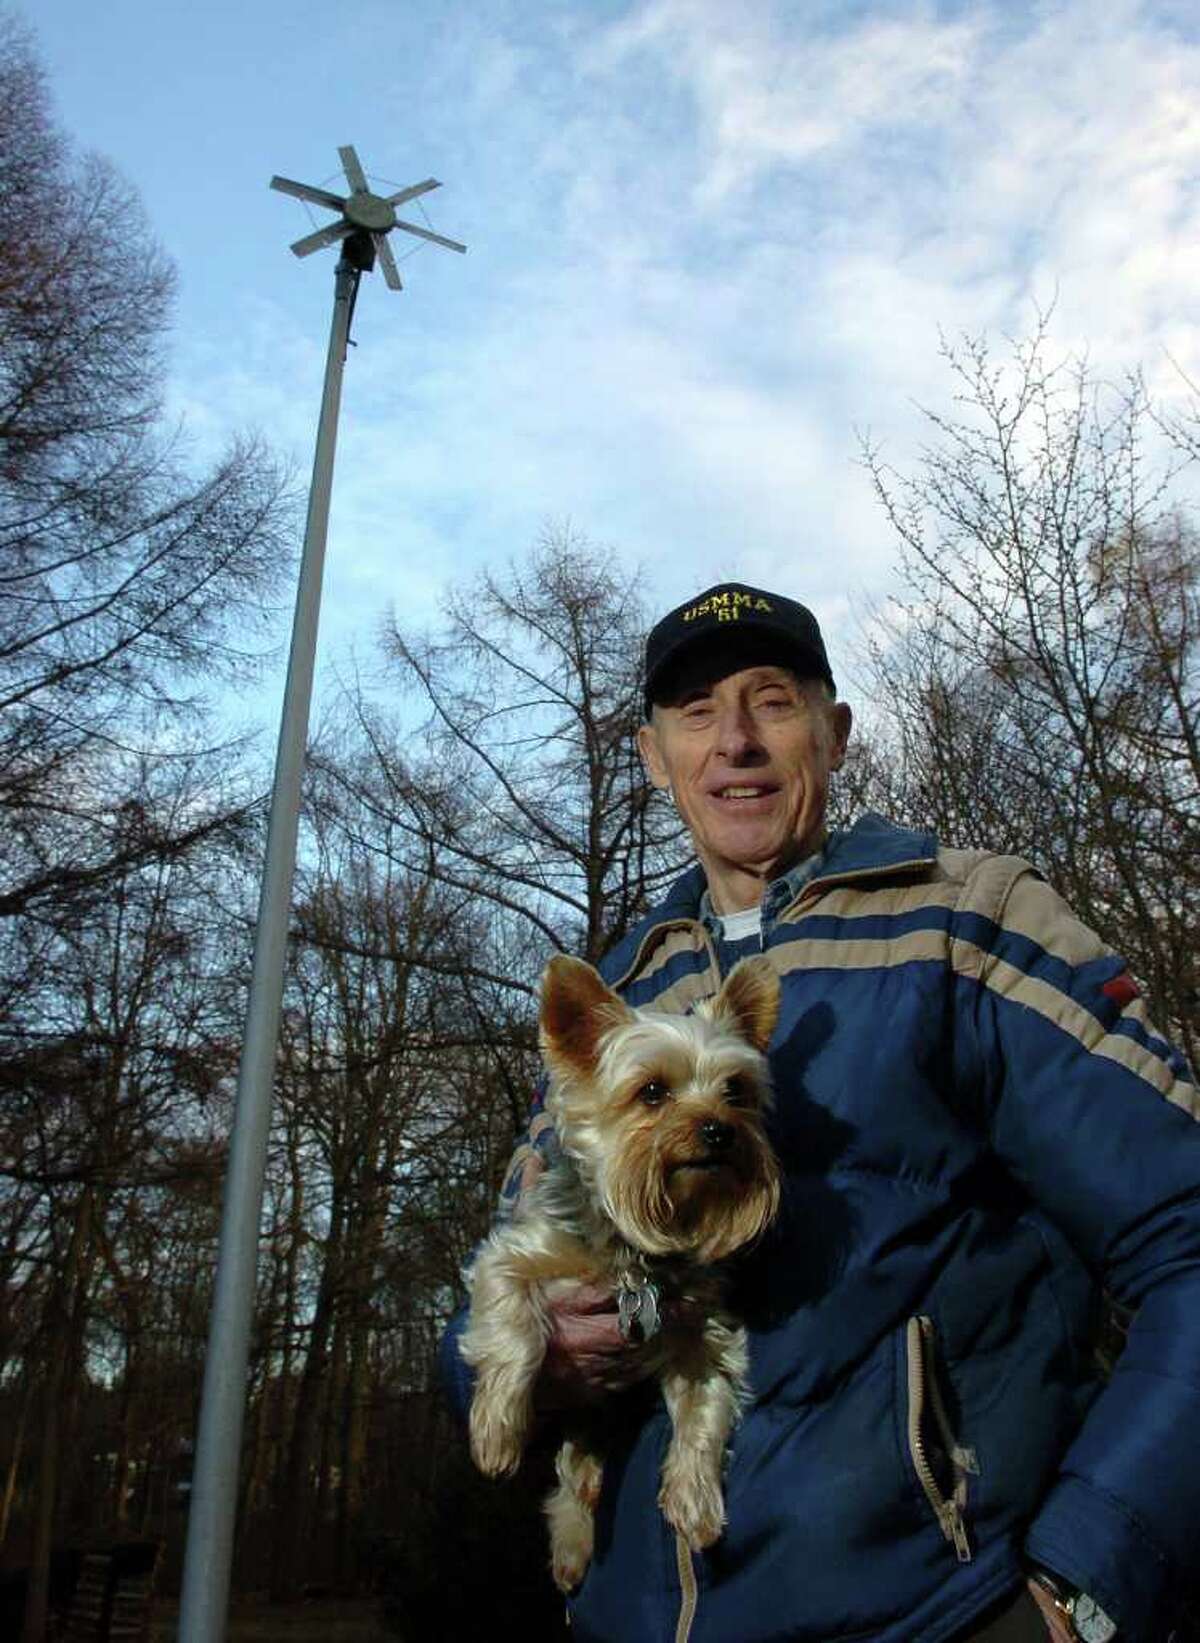 Henry D. Rotman poses with his dog Harley Davidson, behind his house in Milford, Conn. on Tuesday December 7, 2010, in front of the small wind turbine he constructed to generate electric power in 1985. Rotman sucessfully used the power to charge a series of gel batteries used for a diving project. As a former UI engineer, he doubts wind power will work well in Connecticut, due to the unpredictability of the wind here and its lack of sustained strength.